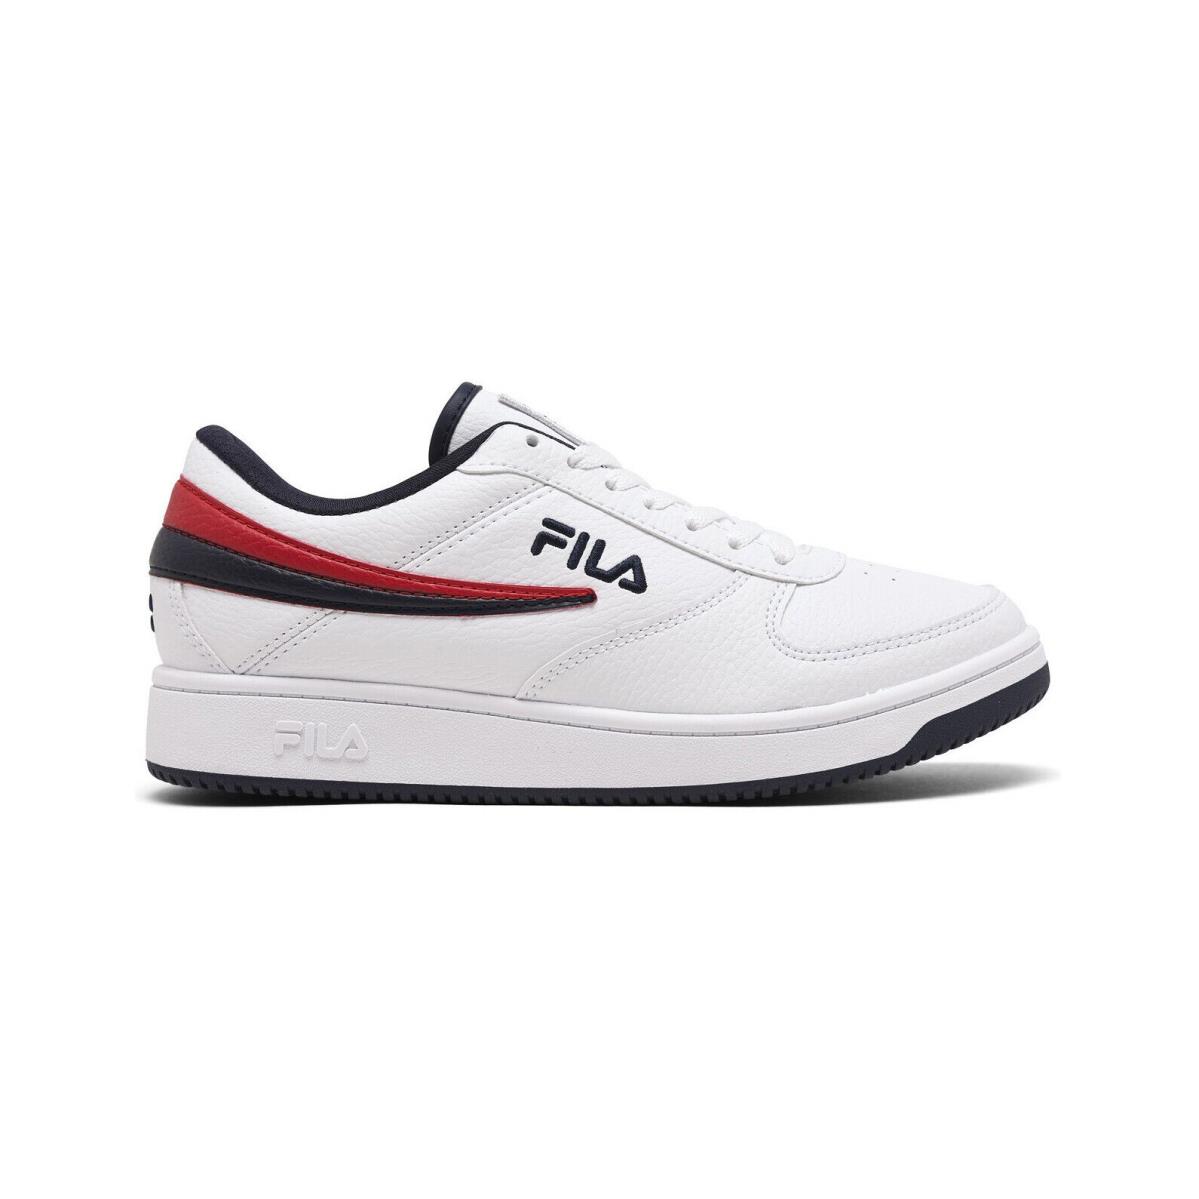 Fila Men A-low White Navy Red Synthetic Leather Low Top Shoes Sneakers